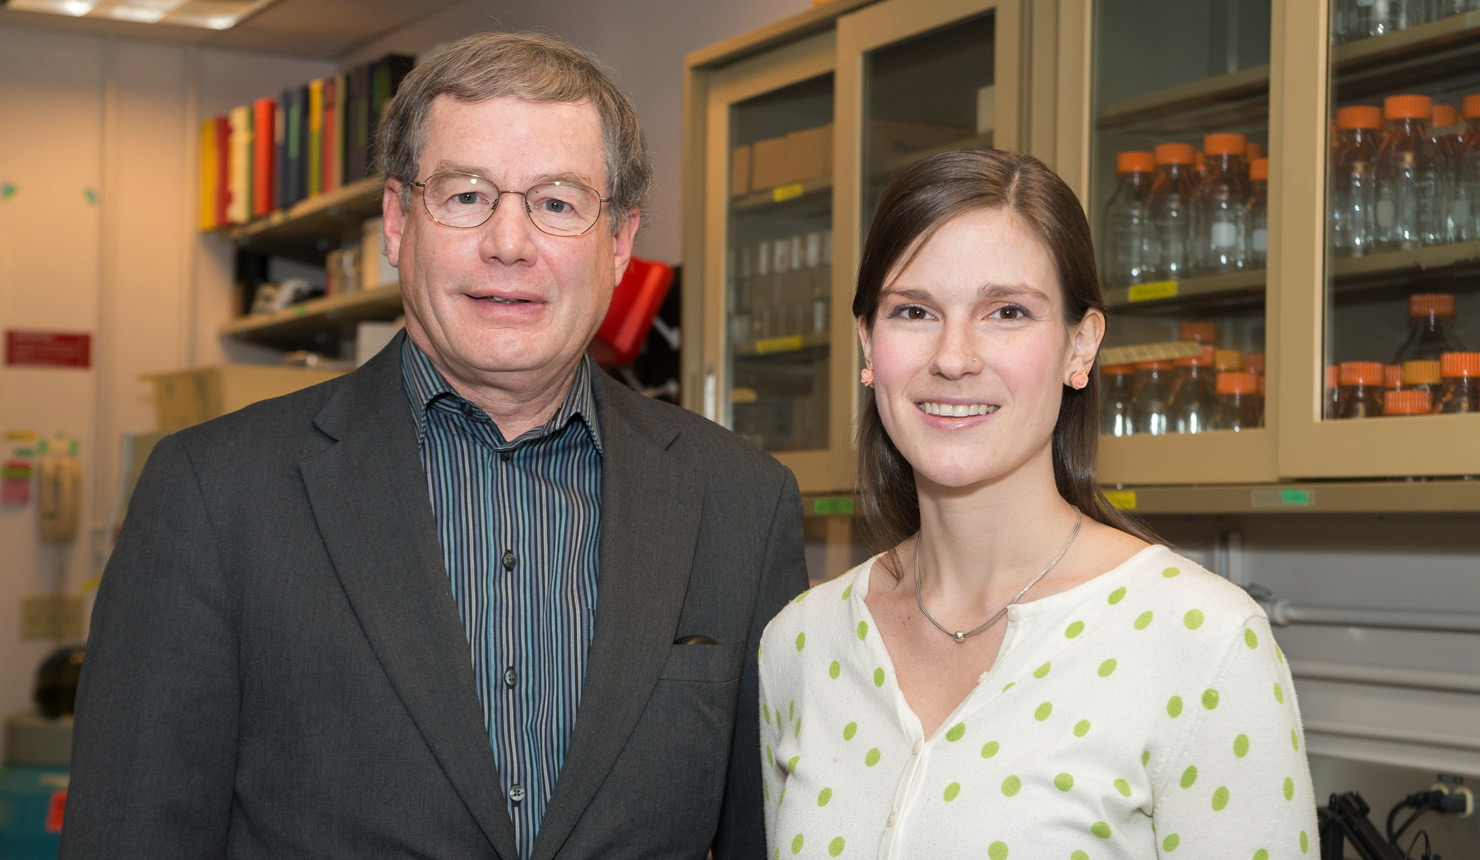 William Green, PhD, professor and chair of microbiology and immunology at Geisel, and Dartmouth PhD candidate Megan O’Connor.